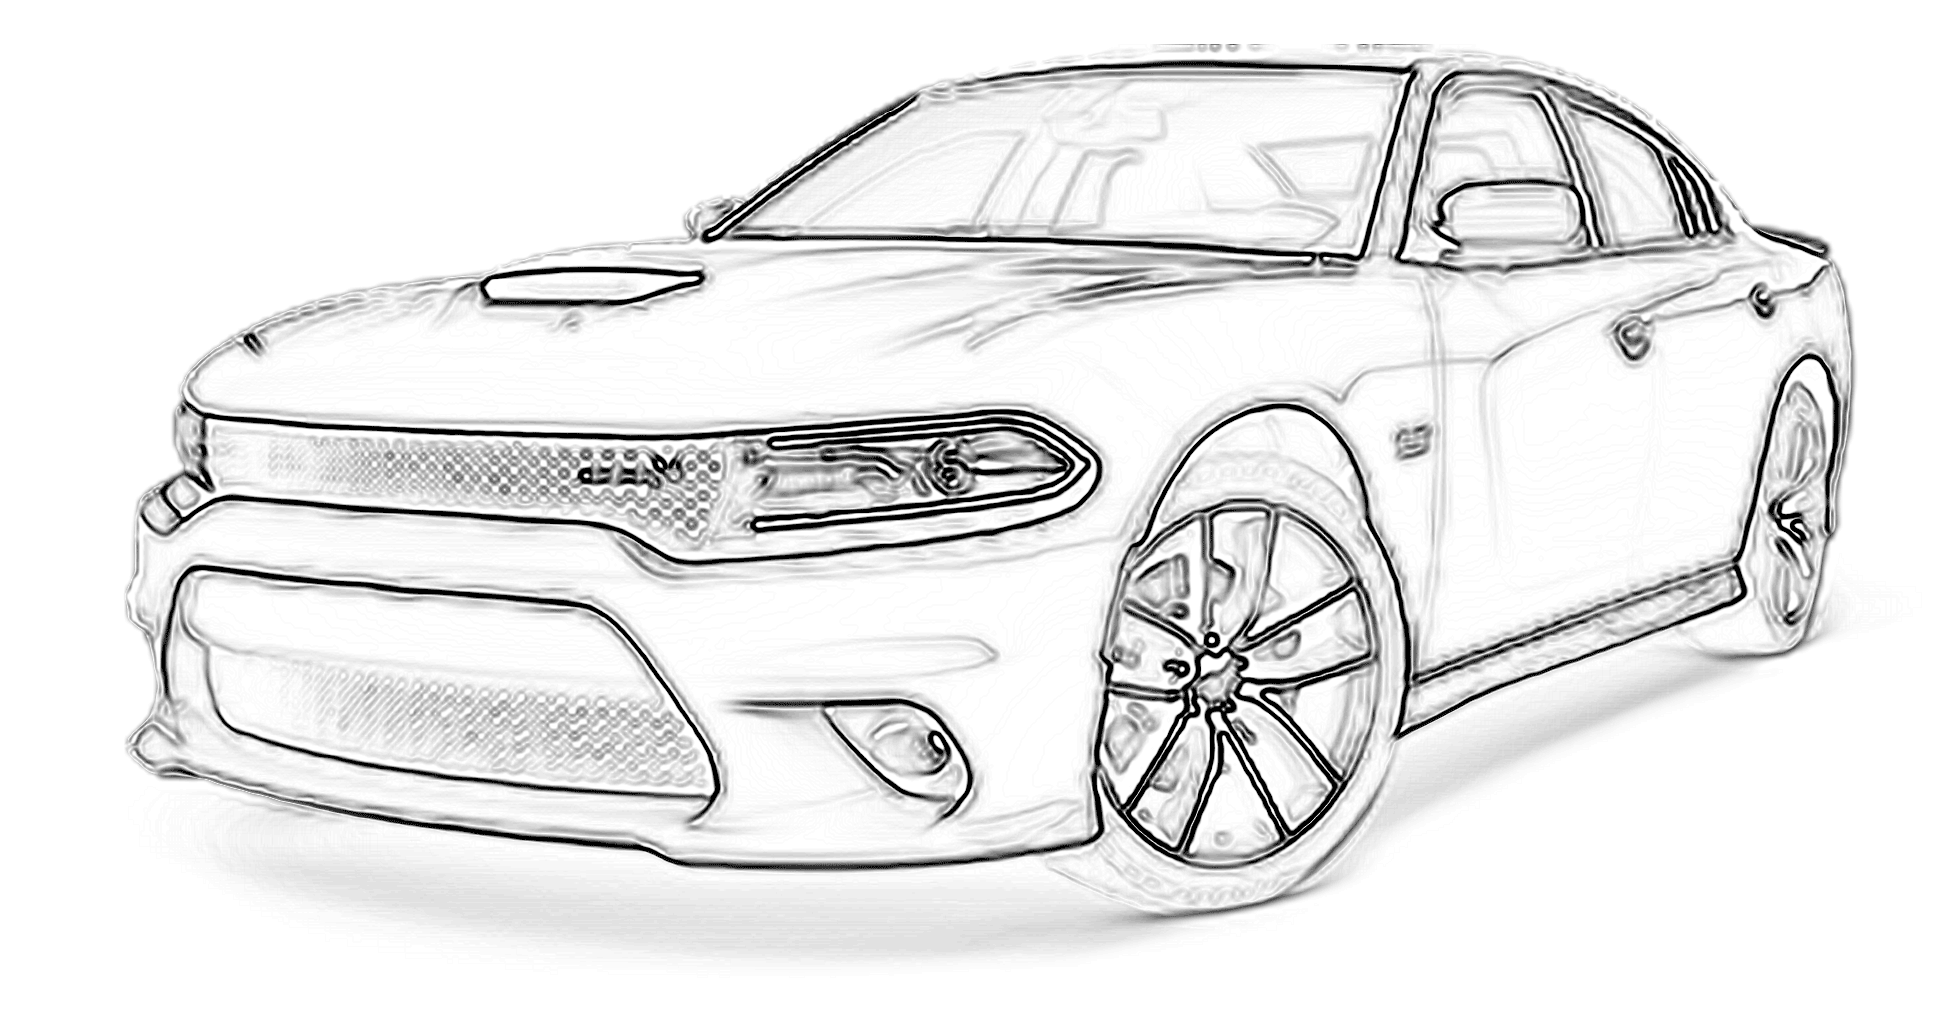 Mopar Coloring Book Cars Coloring Pages Dodge Charger Coloring Pages ...